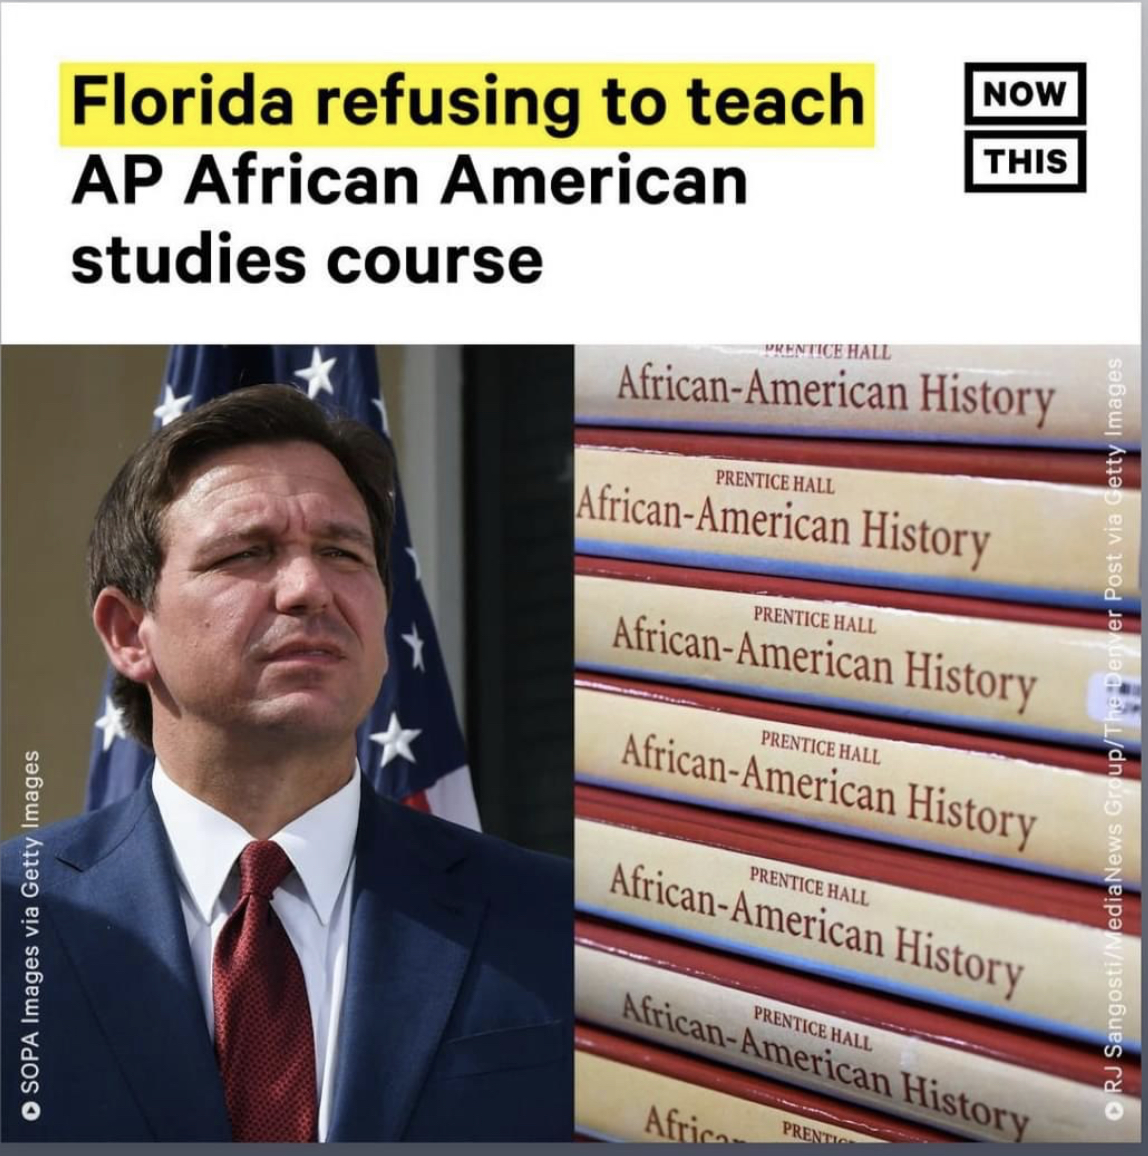 Image of Governor DeSantis from news outlet Now This.